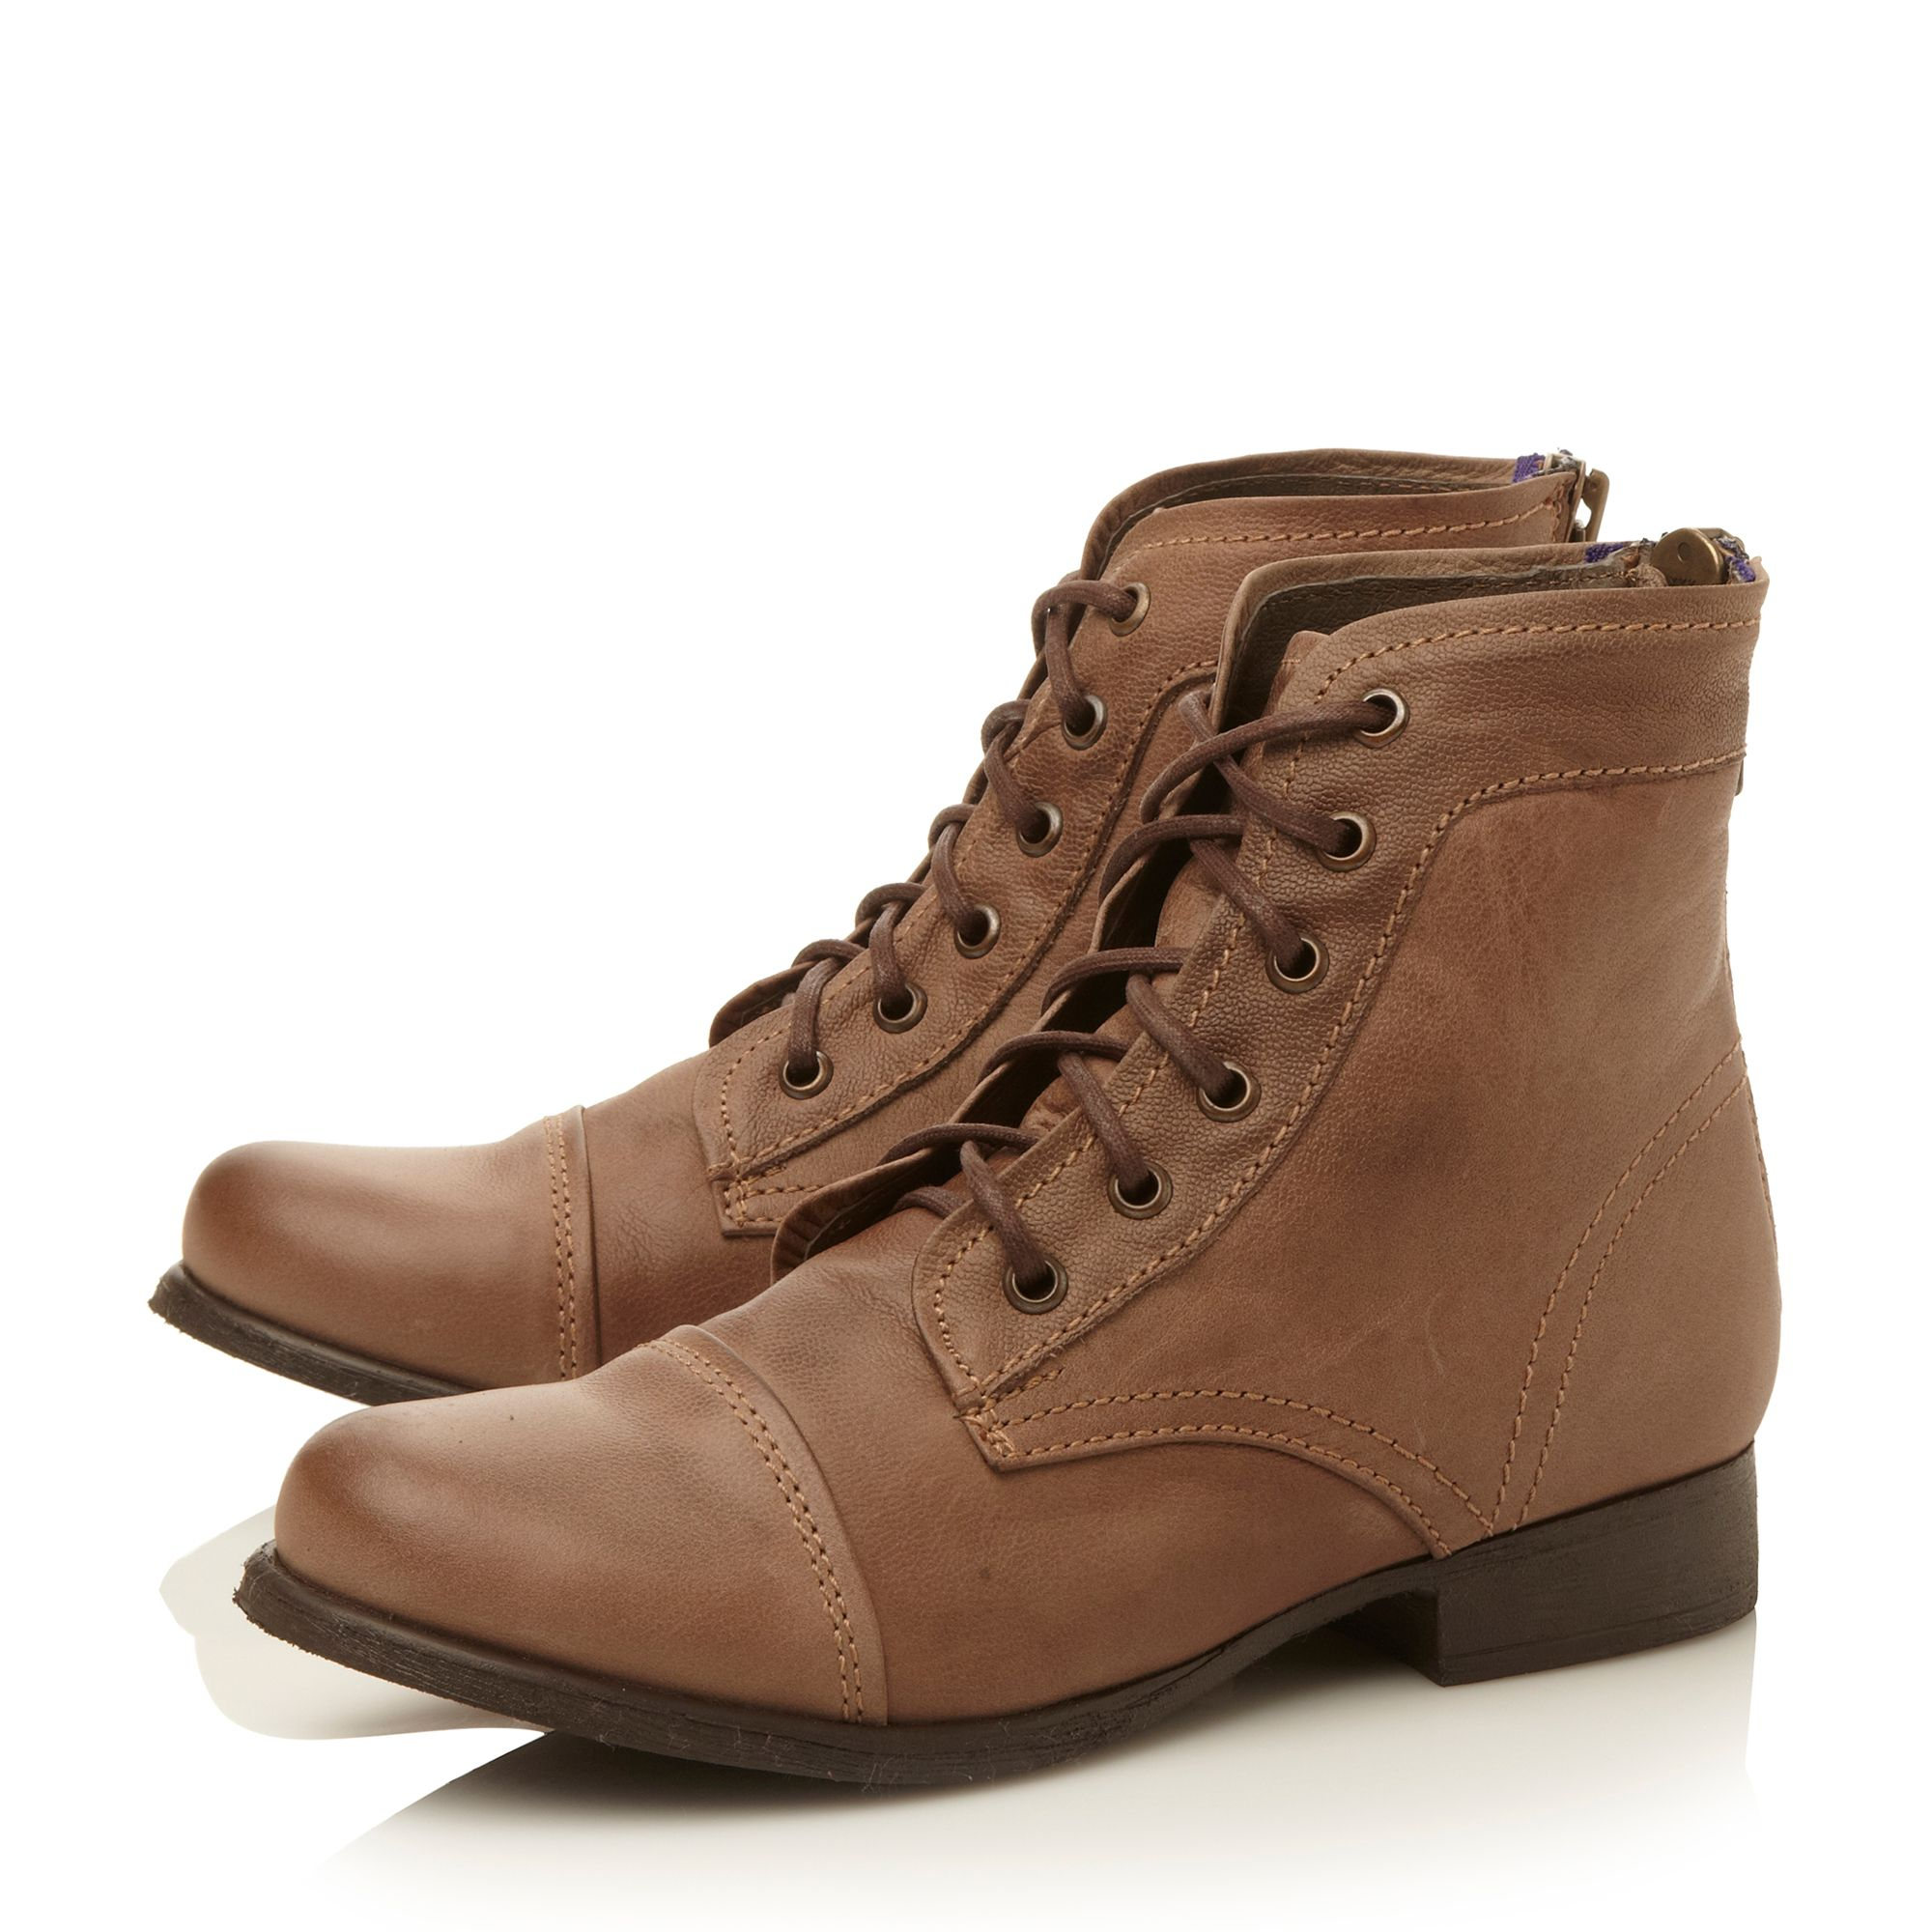 Steve madden Tundra Lace Up Ankle Boots in Brown | Lyst